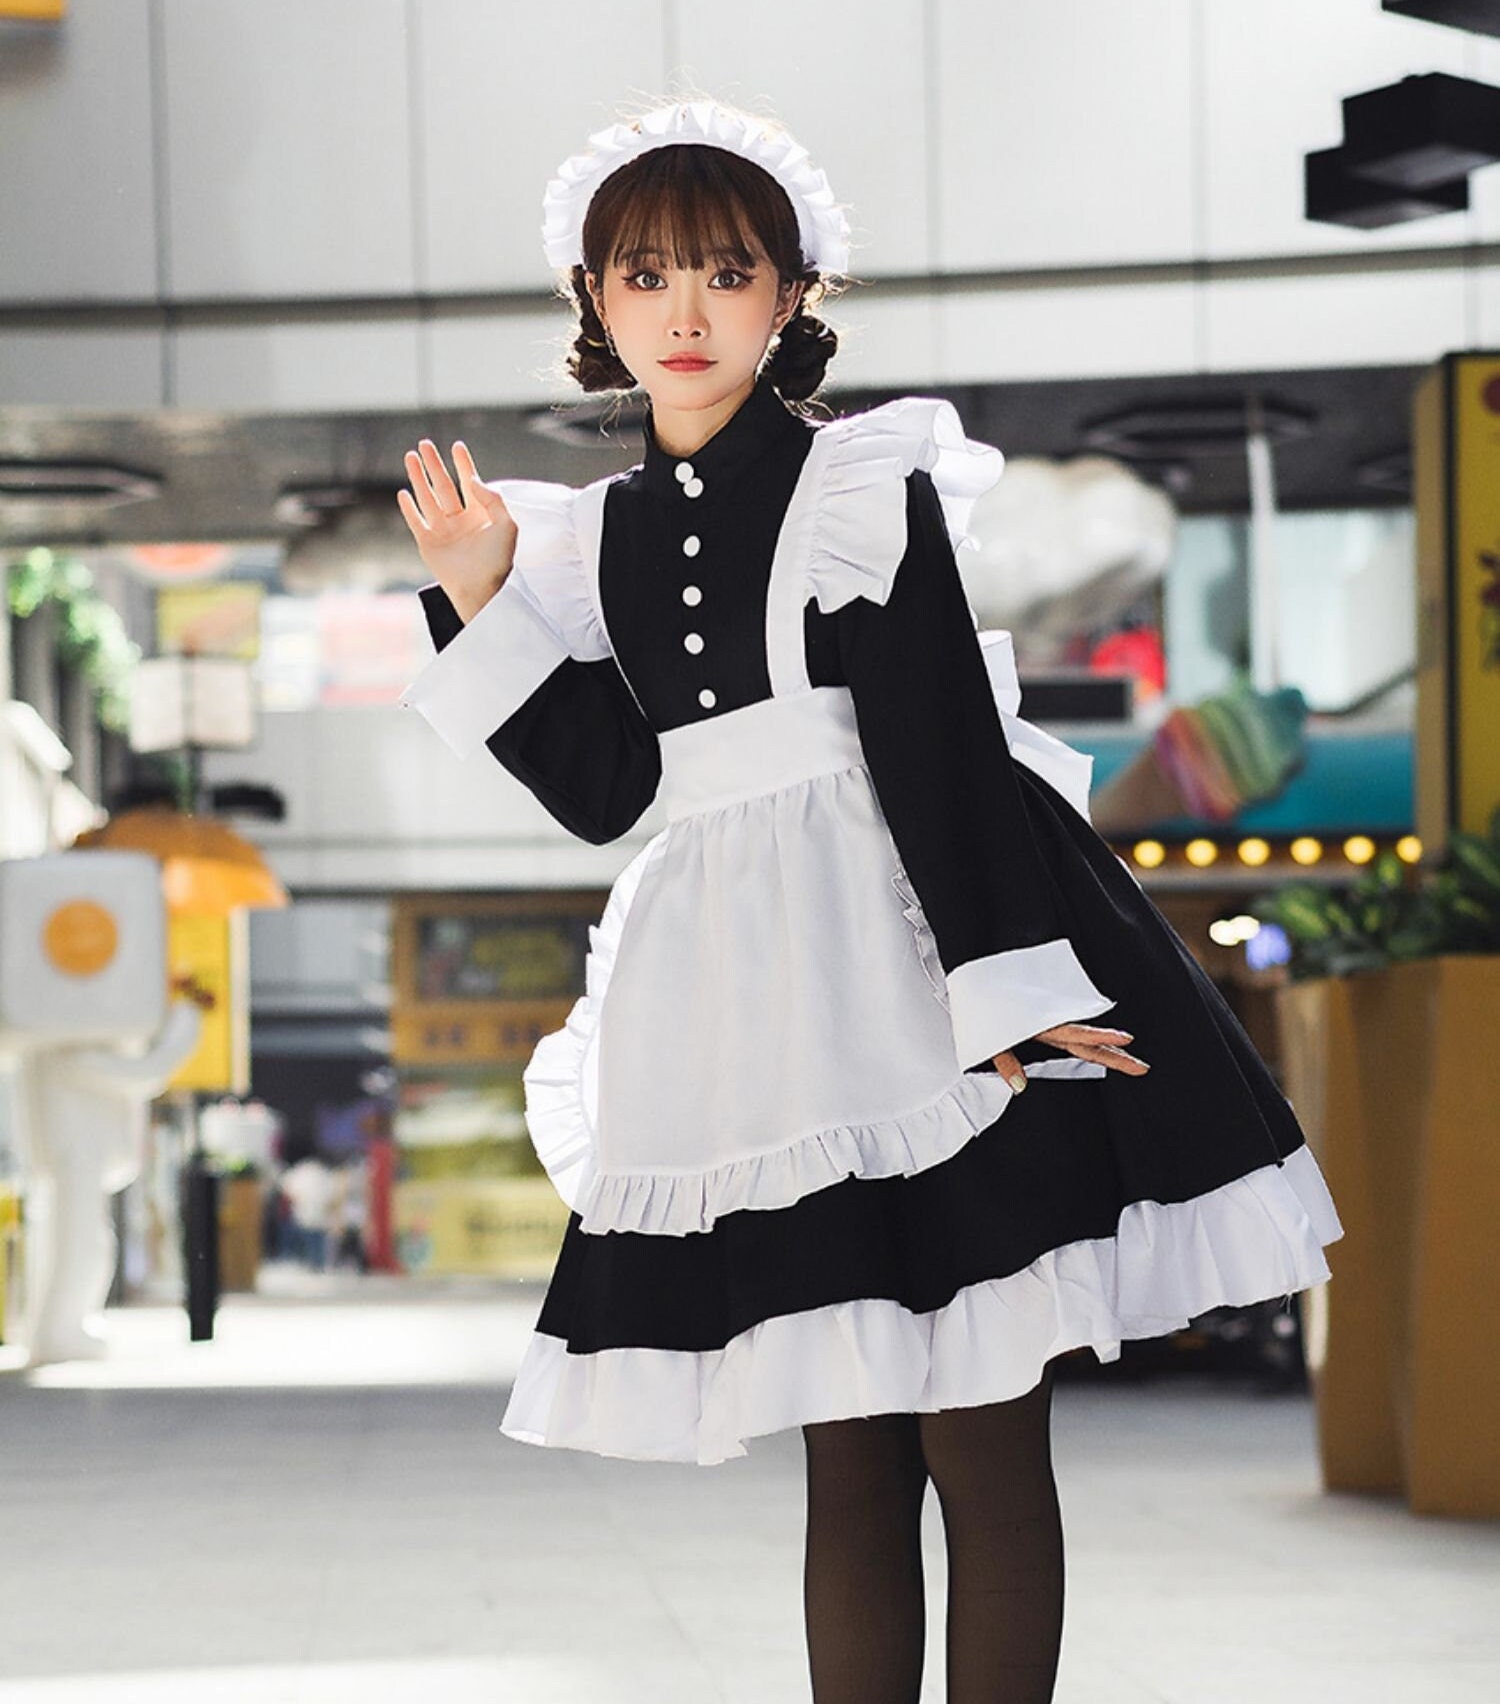 Complete Neko Cat French Maid Outfit Cosplay Costume Kawaii